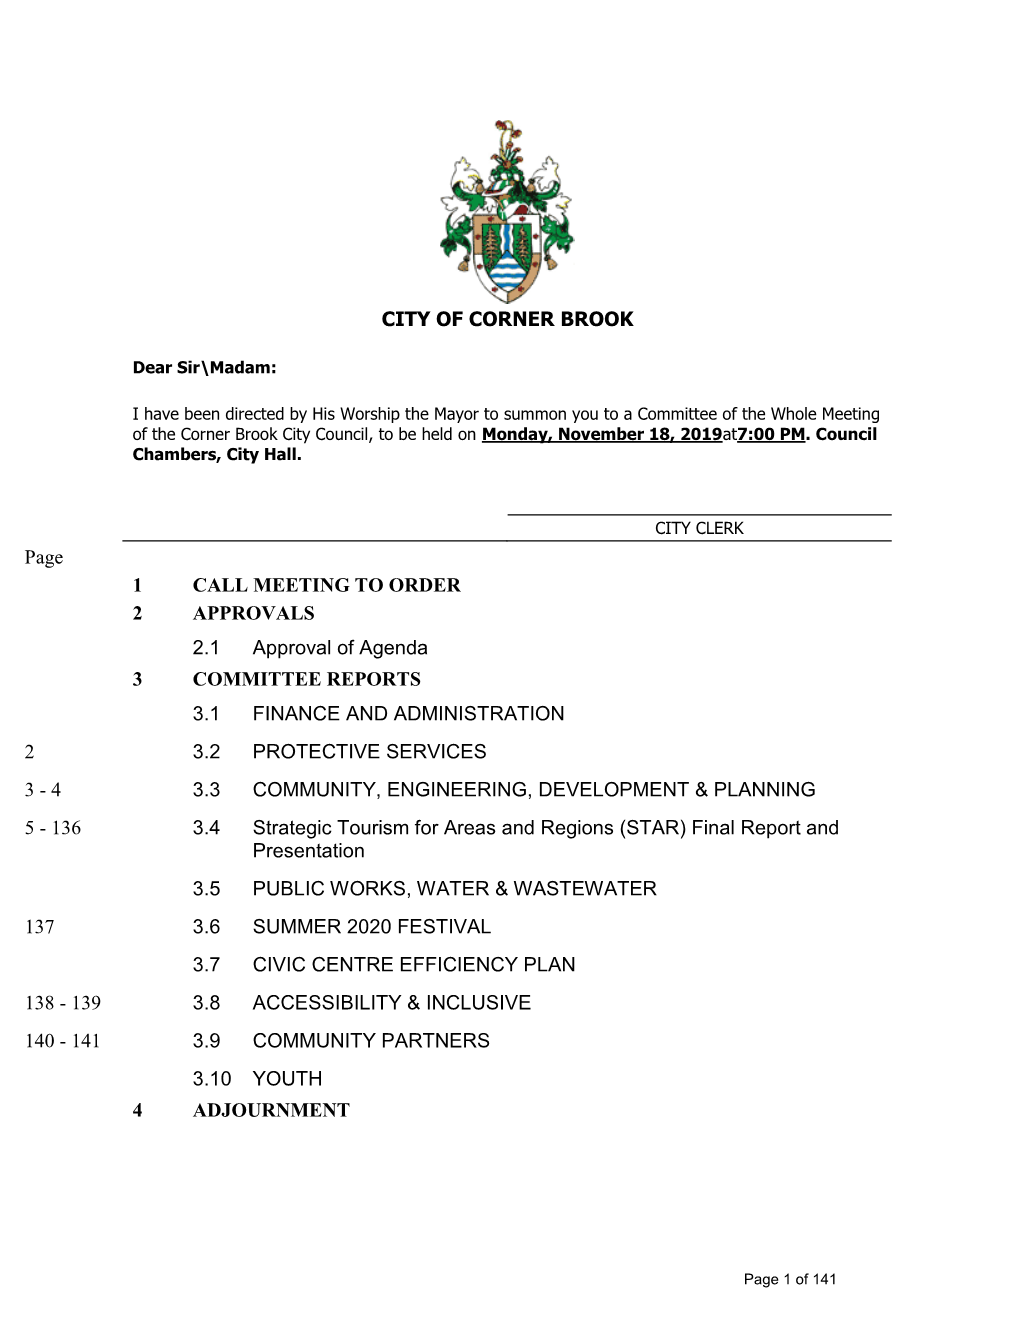 Committee of the Whole Meeting of the Corner Brook City Council, to Be Held on Monday, November 18, 2019At7:00 PM